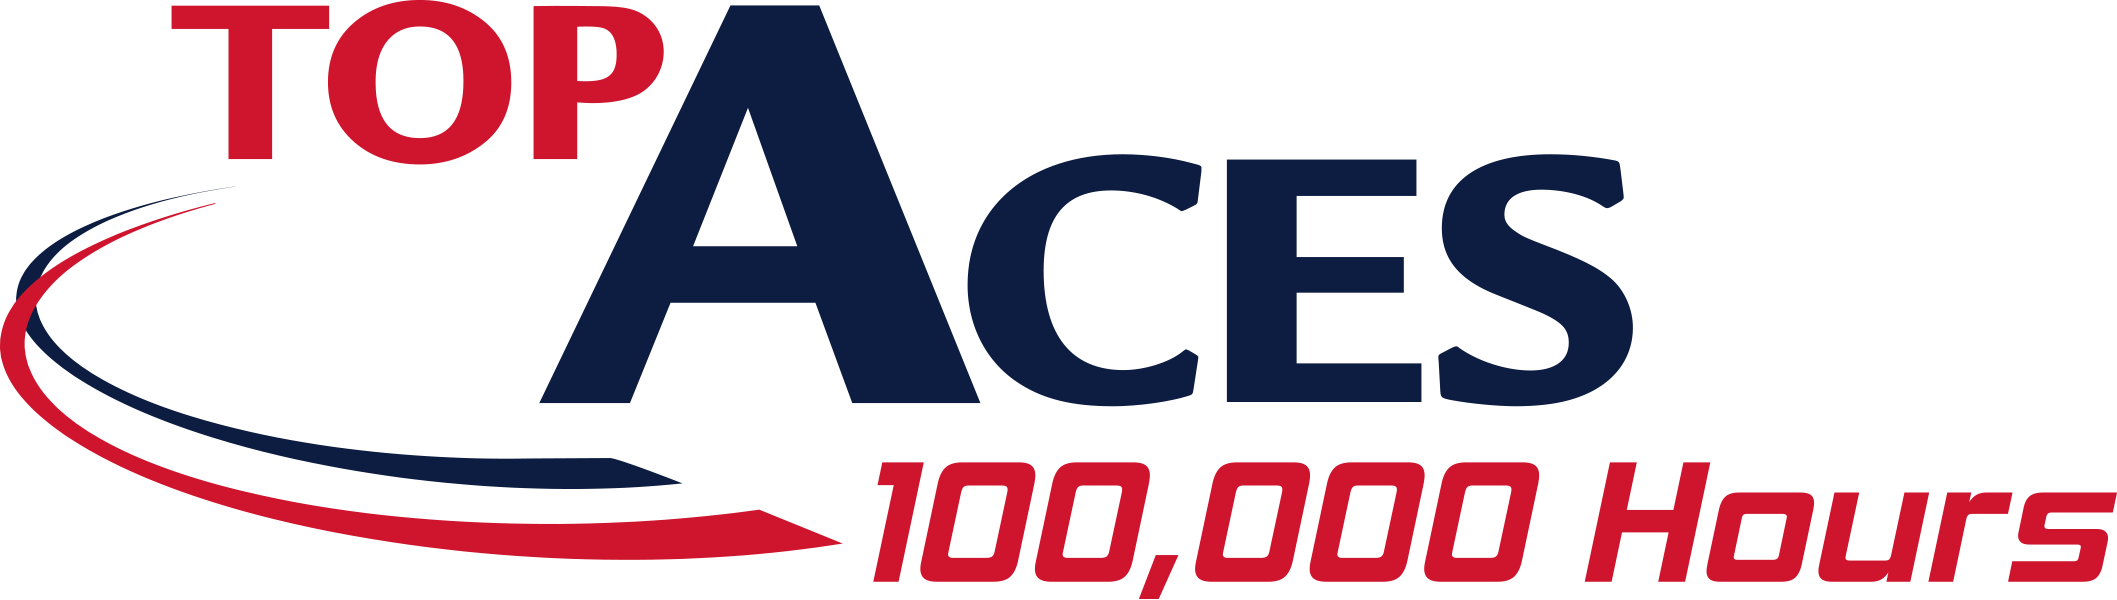 top-aces-logo-hours